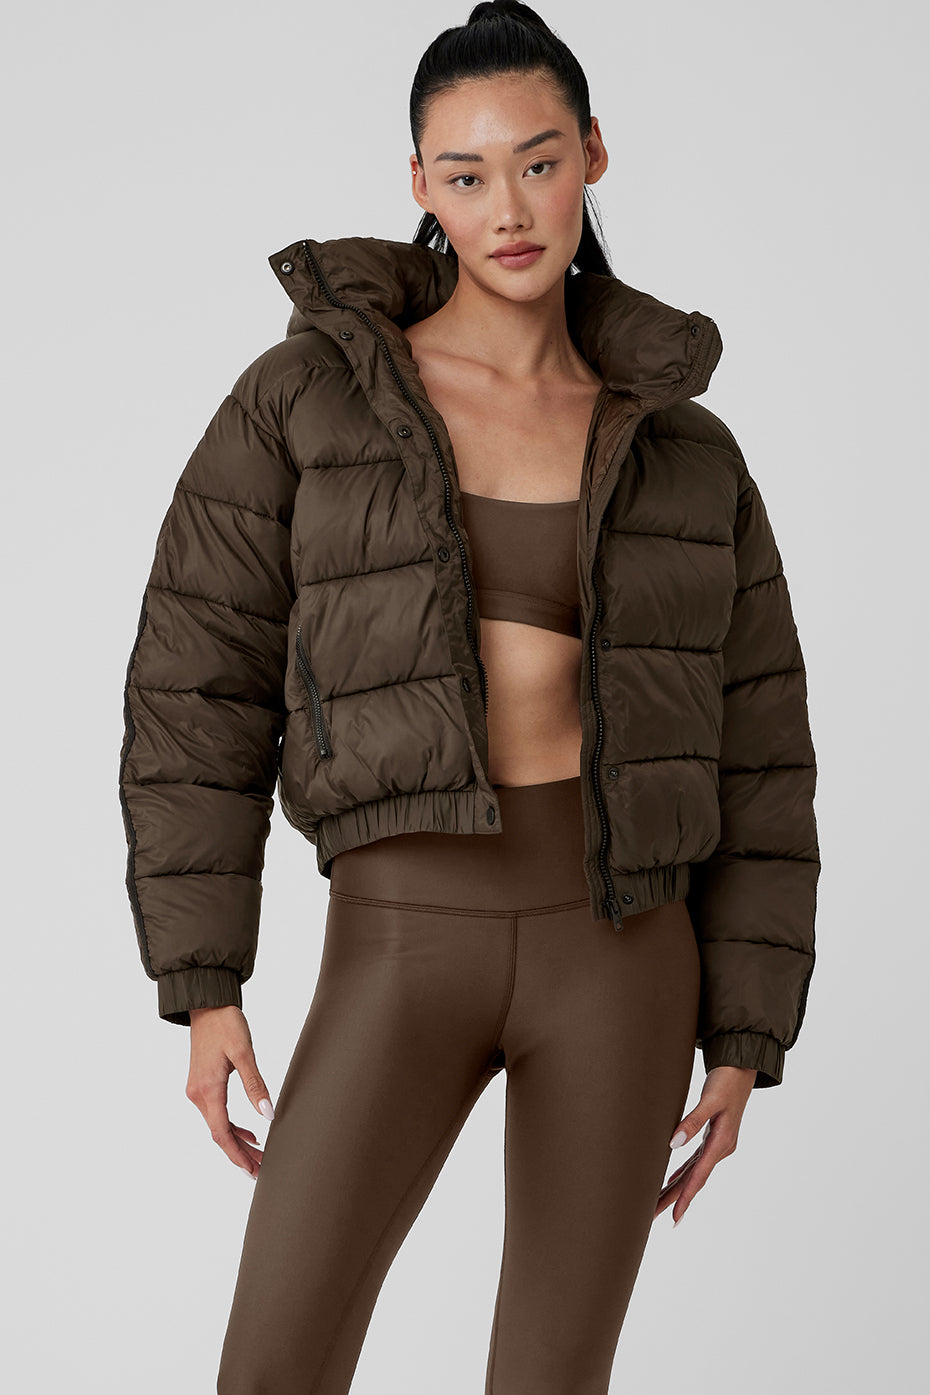 Alo Yoga Alo Foxy Sherpa Hooded Jacket Dark Olive Green - $150 - From Andies